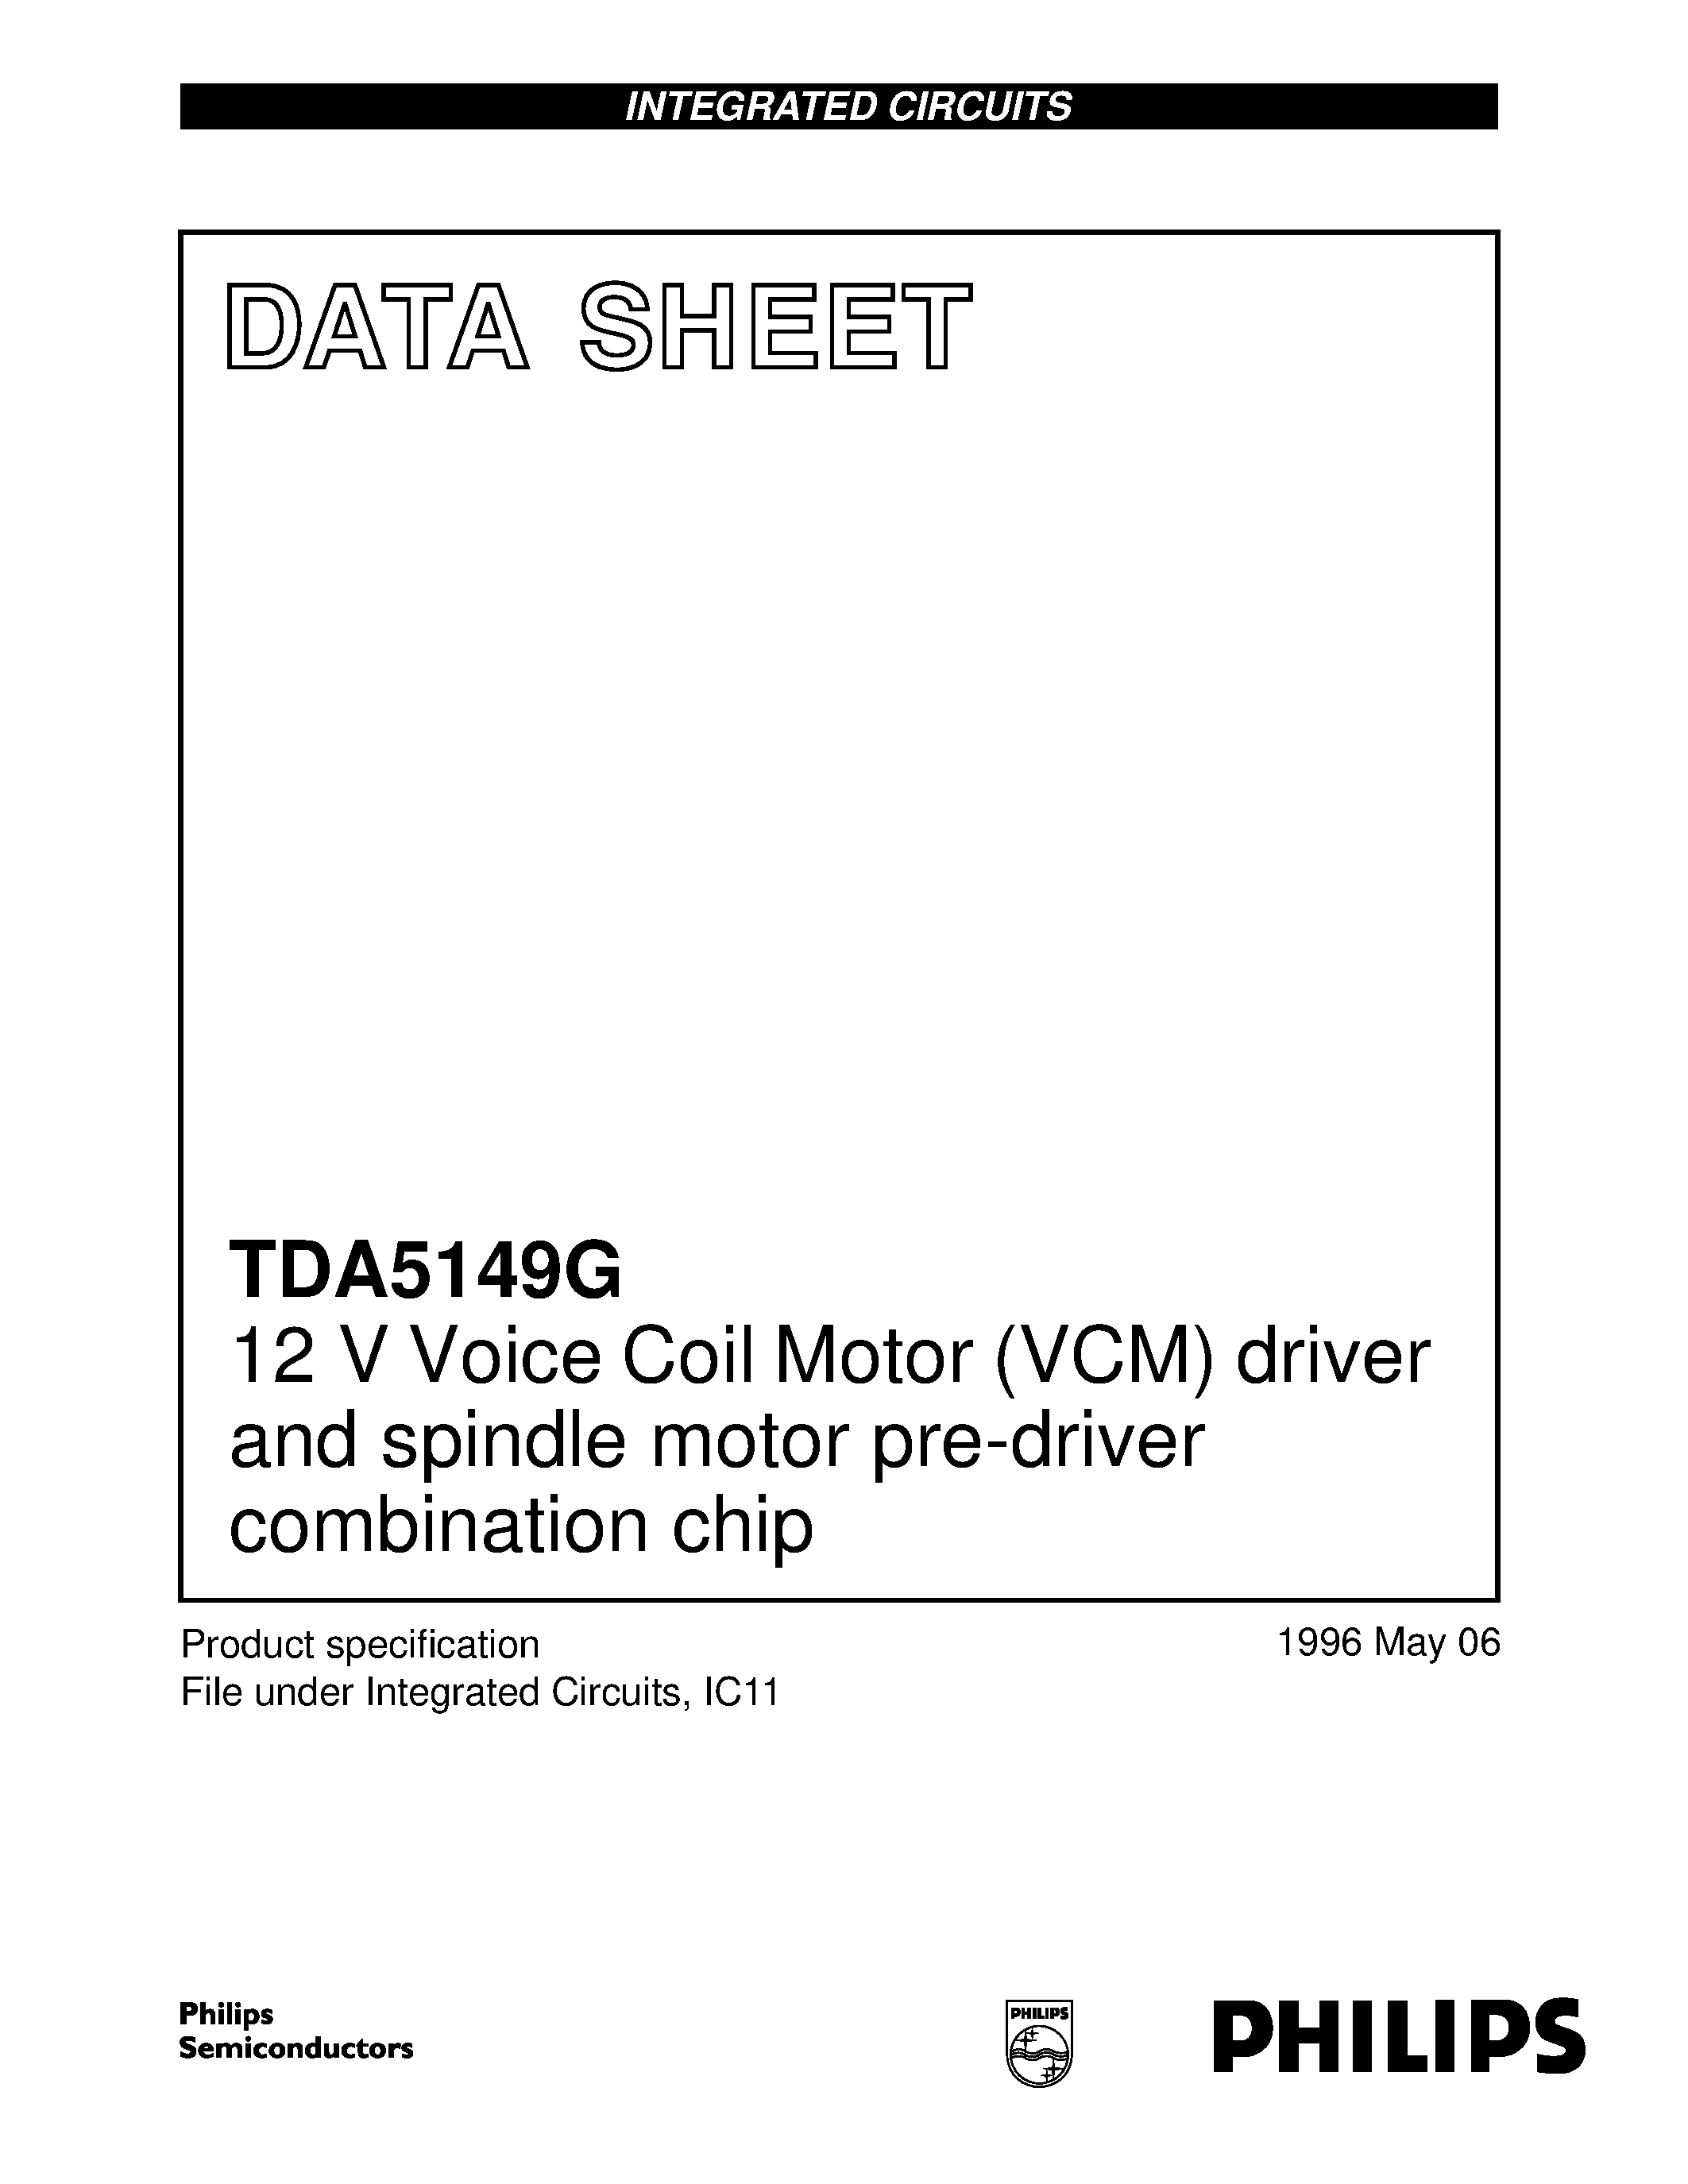 Datasheet TDA5149G - 12 V Voice Coil Motor VCM driver and spindle motor pre-driver combination chip page 1